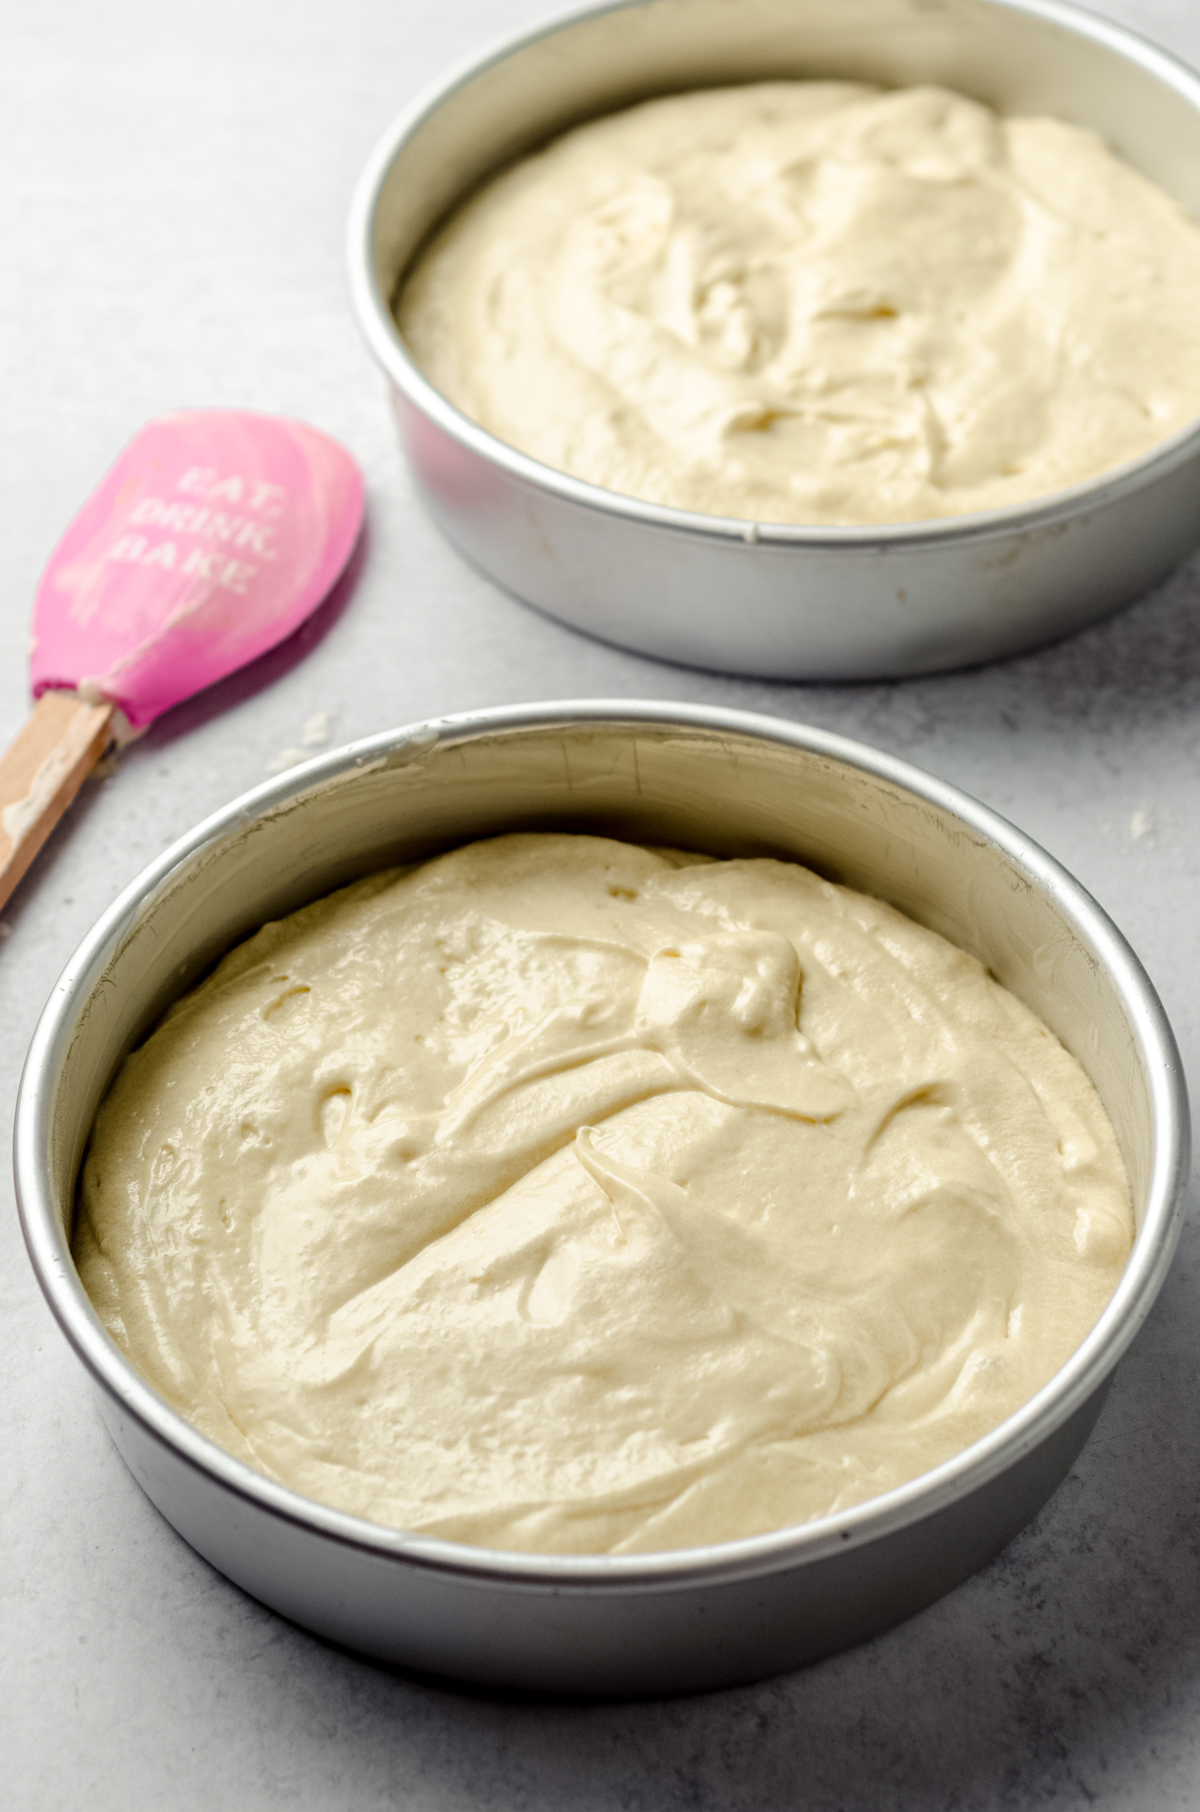 Yellow cake batter in two 8" round cake pans.